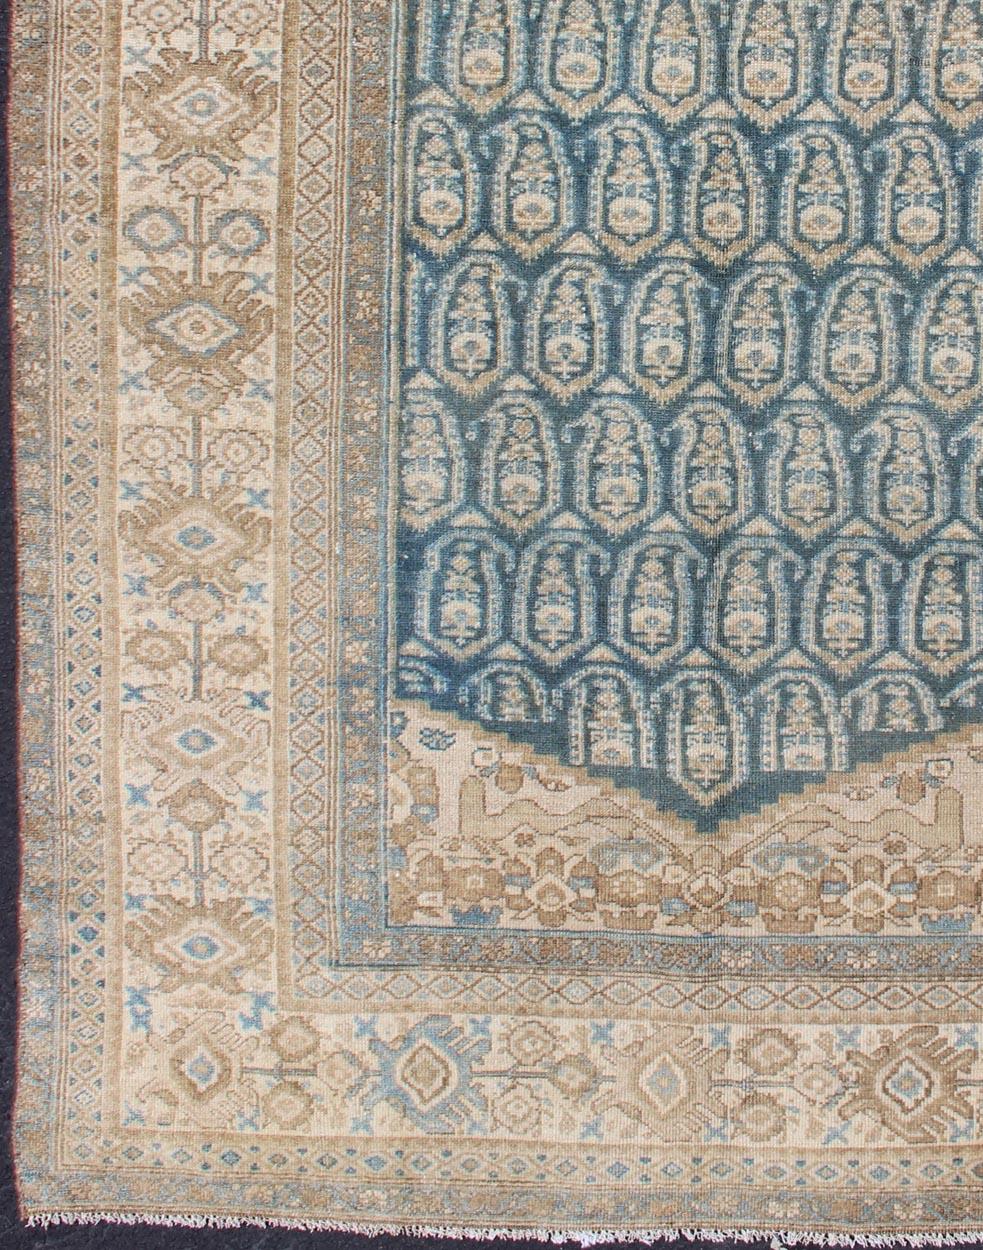 Antique Malayer rug from Persia in Taupe, nude, and Aegean blue, rug 19-0104, country of origin / type: Iran / Malayer, circa 1900.

This beautiful antique Malayer rug from Persia features an expansive all-over design. The central field of repeating